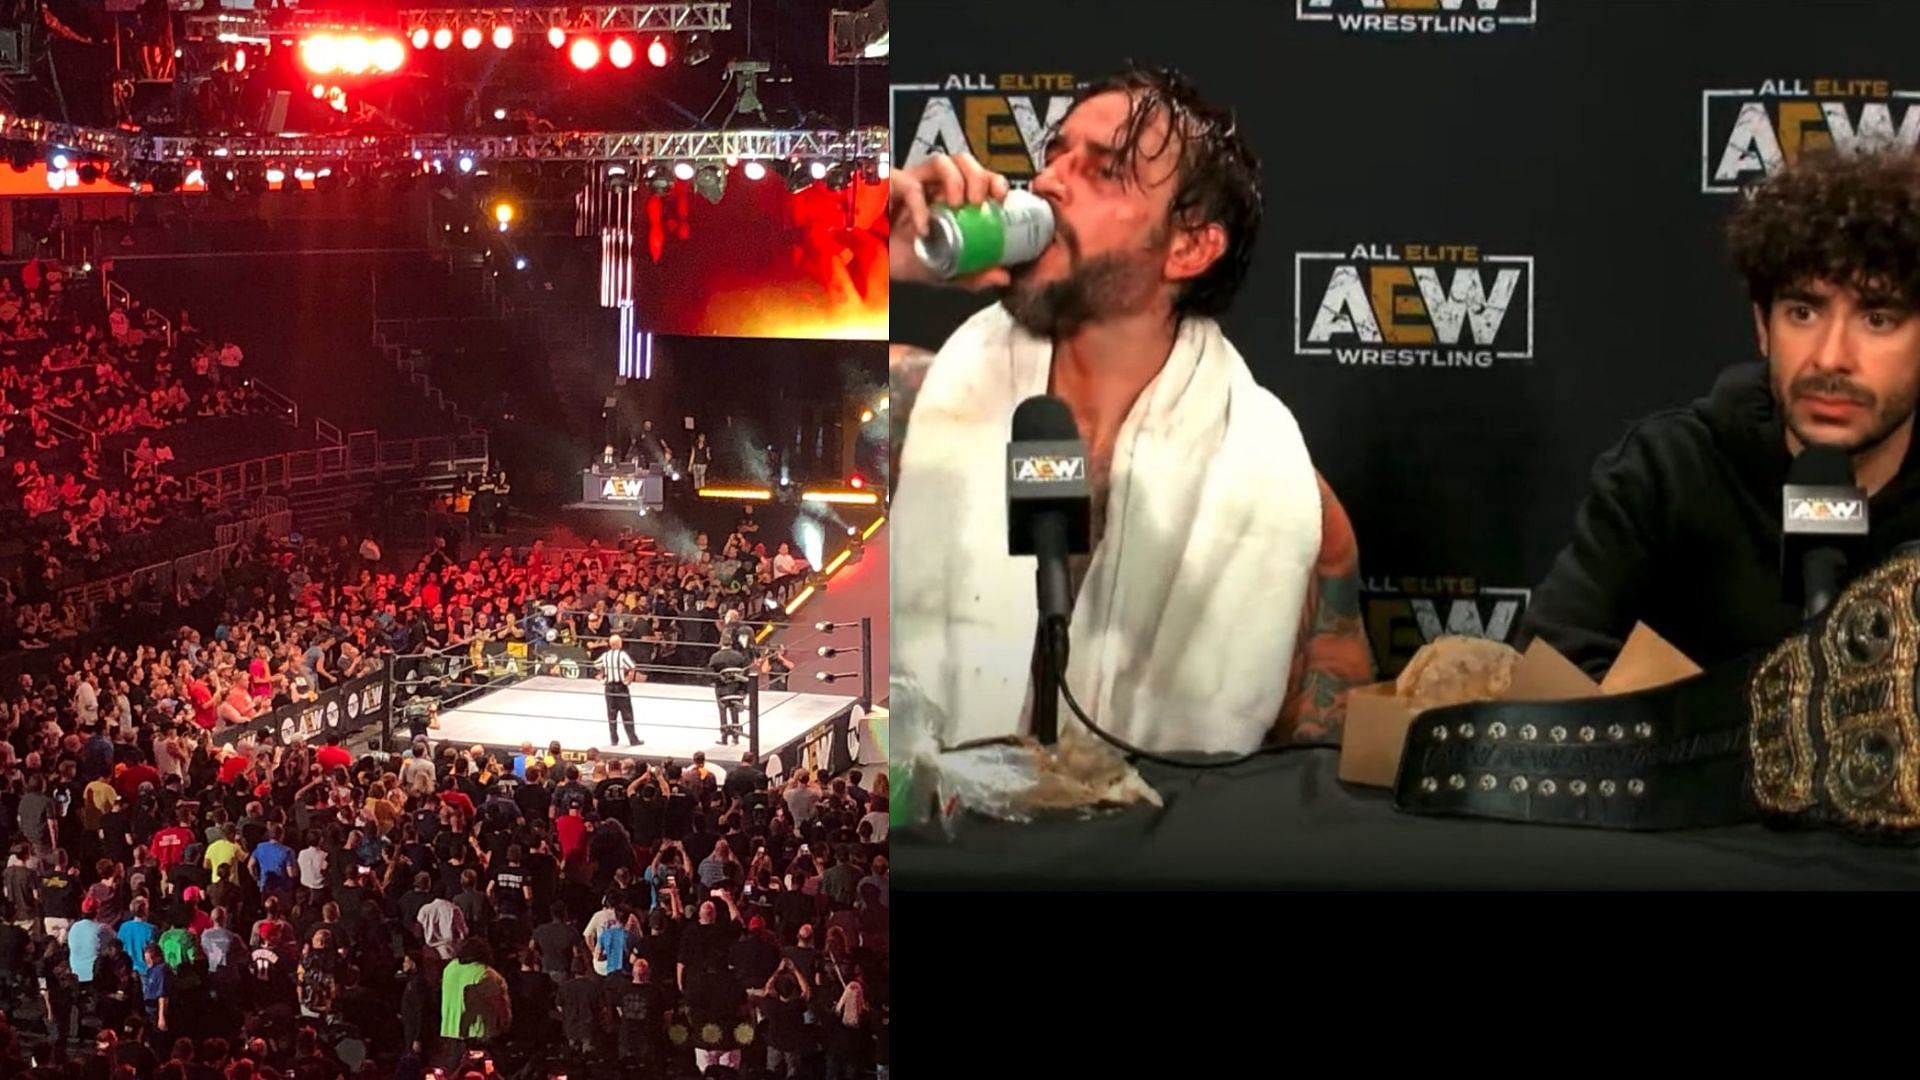 Tony Khan and CM Punk previously worked with each other in AEW before his firing